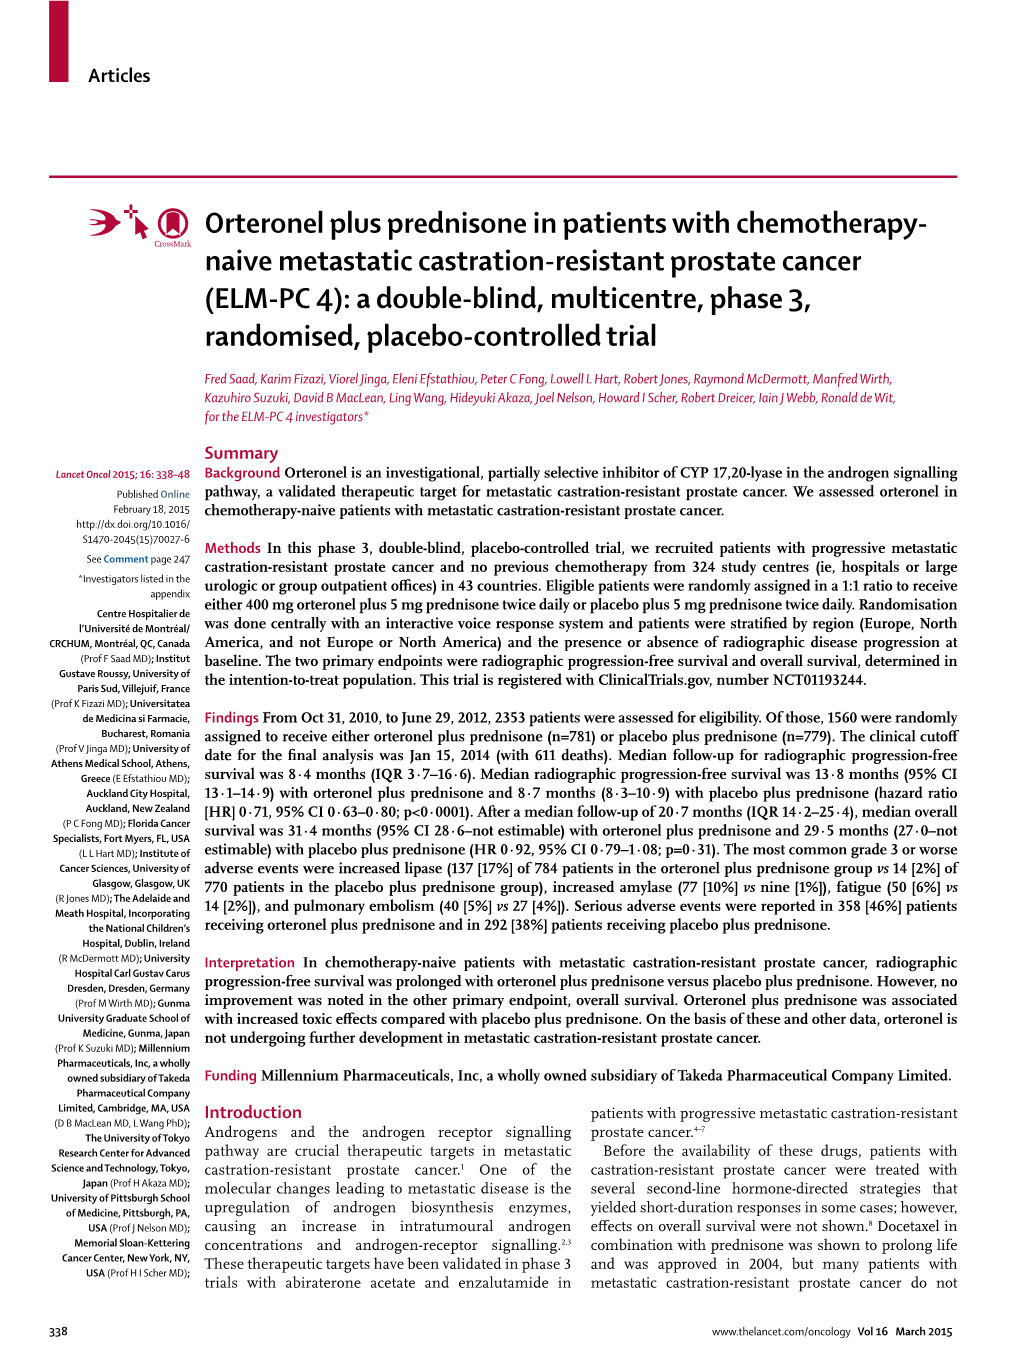 Orteronel Plus Prednisone in Patients with Chemotherapy